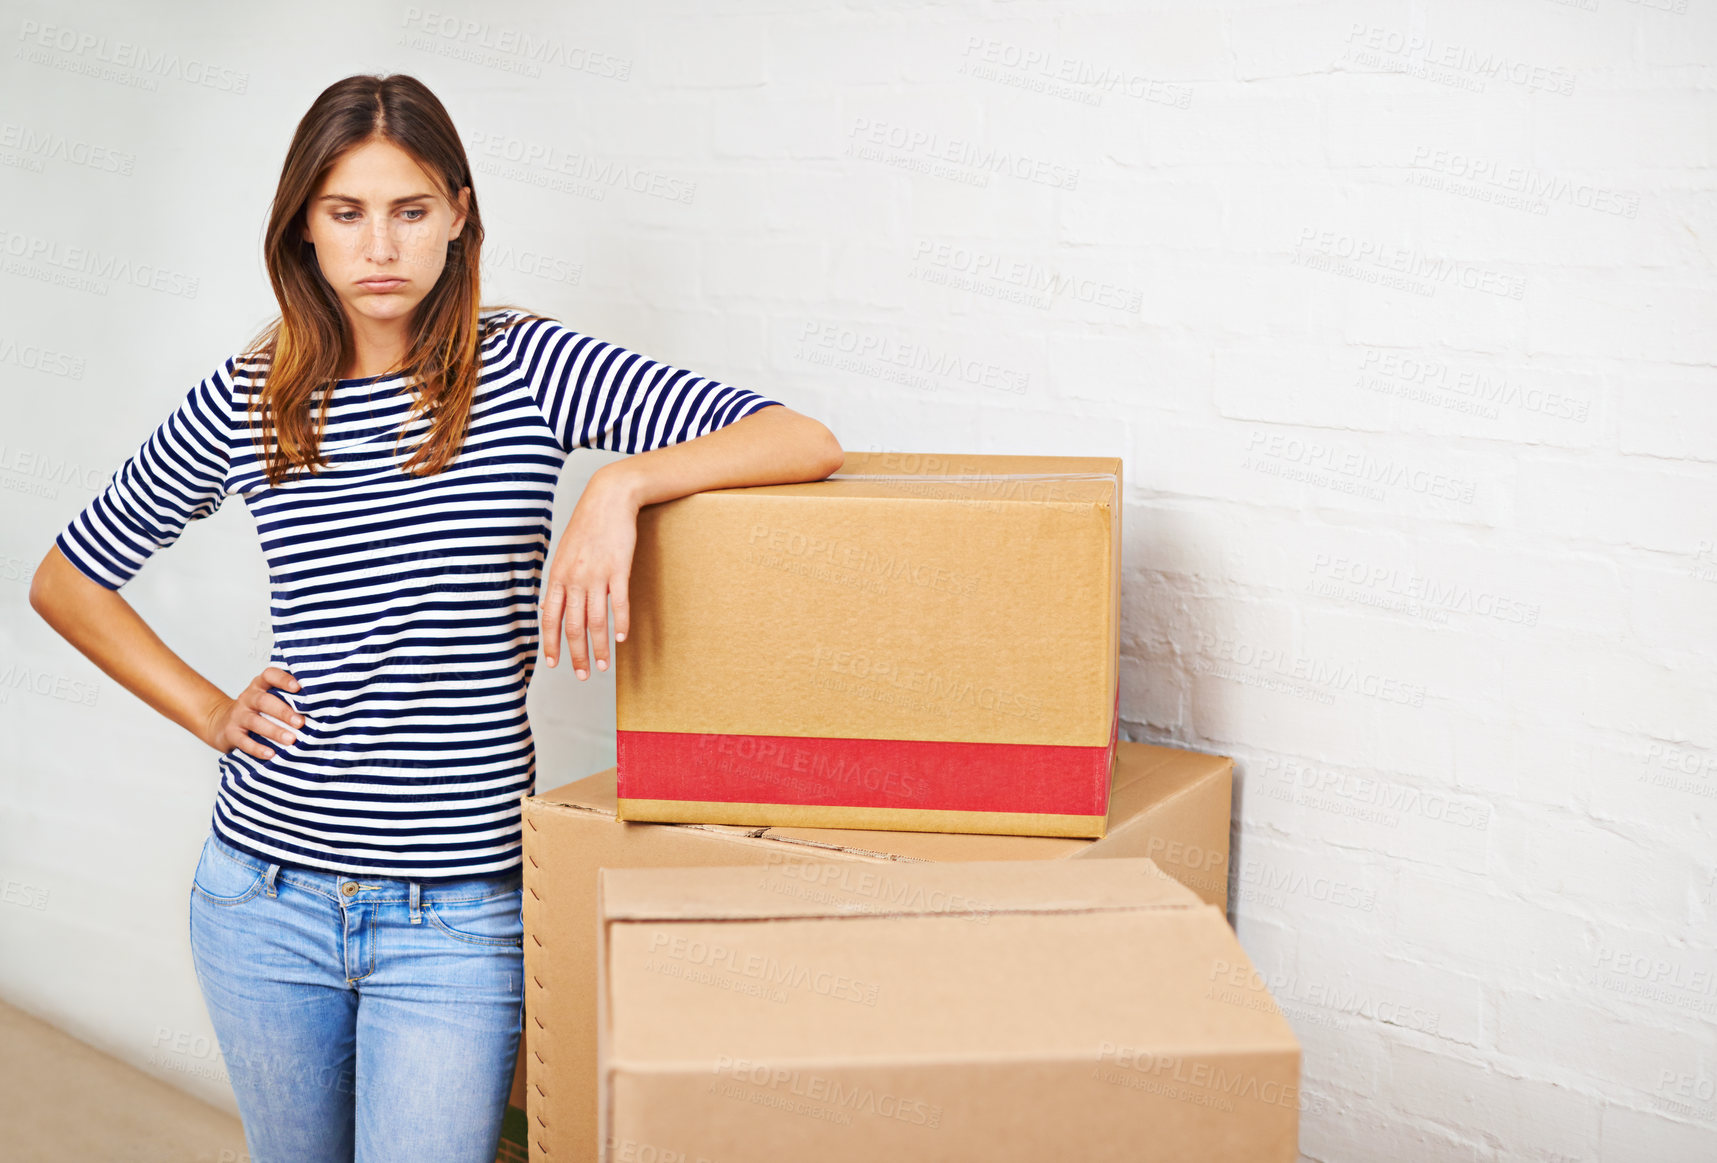 Buy stock photo Shot of an attractive young woman busy moving house